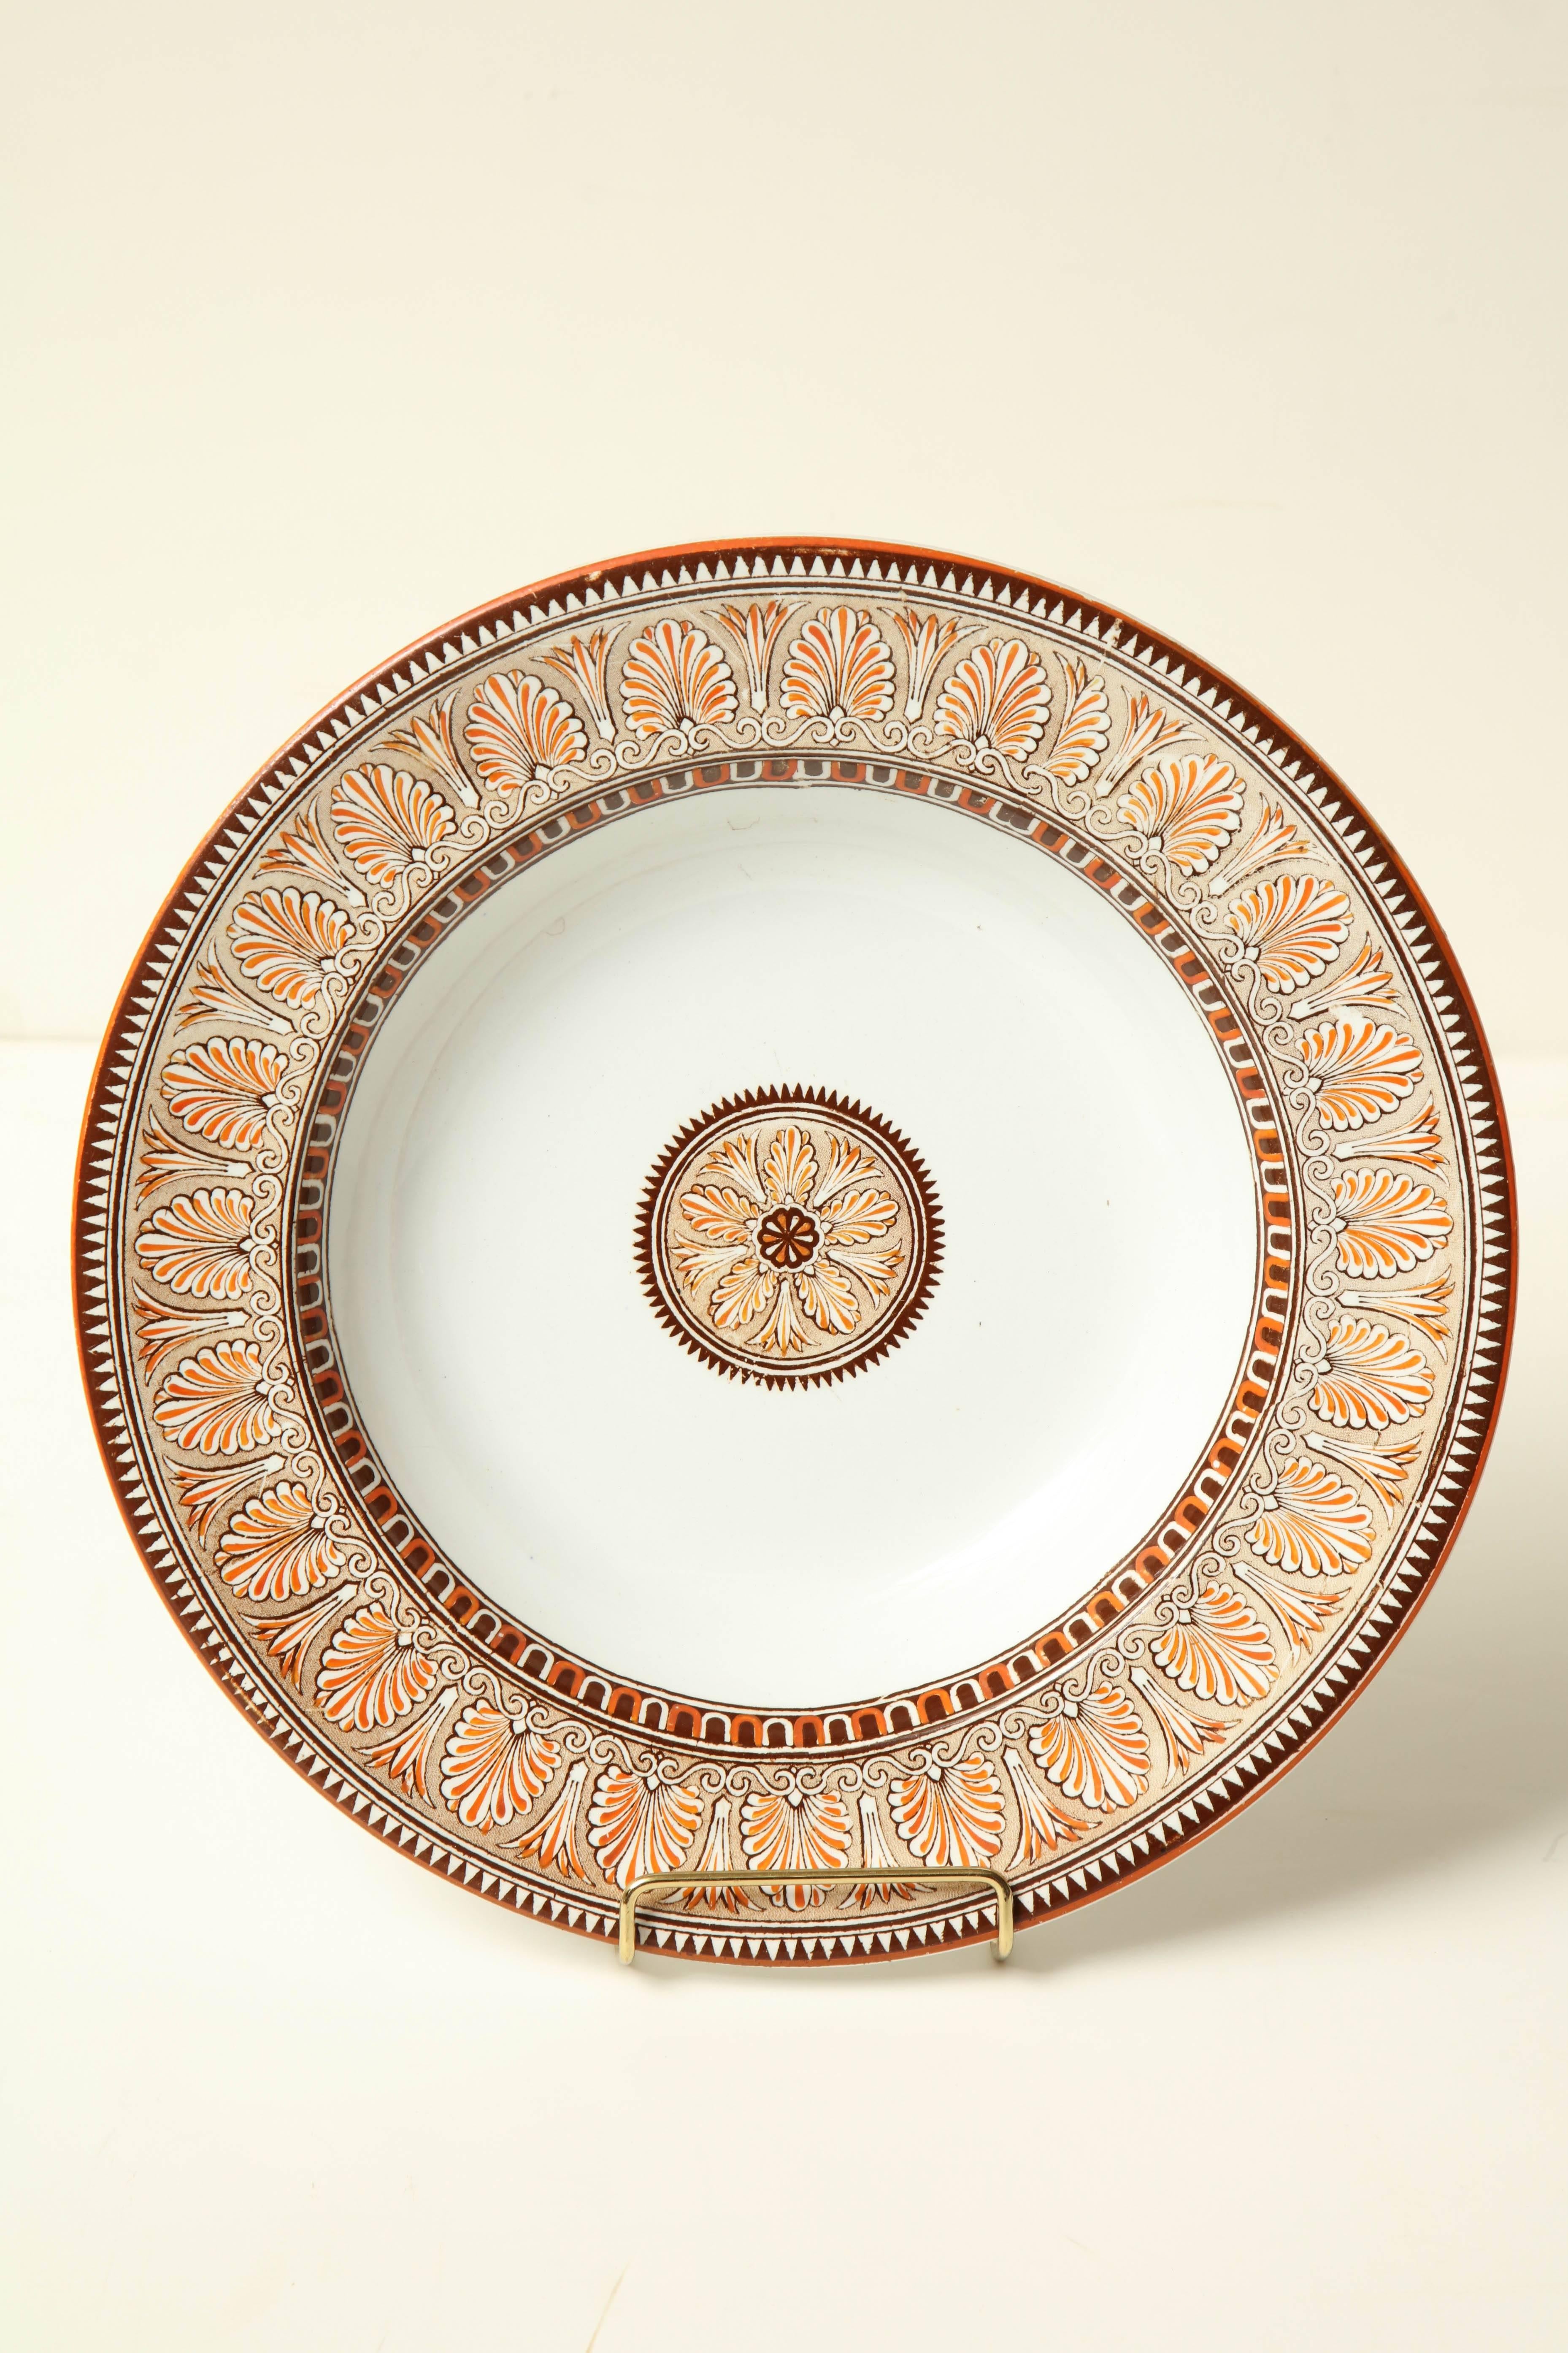 Six, 19th century Copeland neoclassical soup plates, one plate has a small crack.